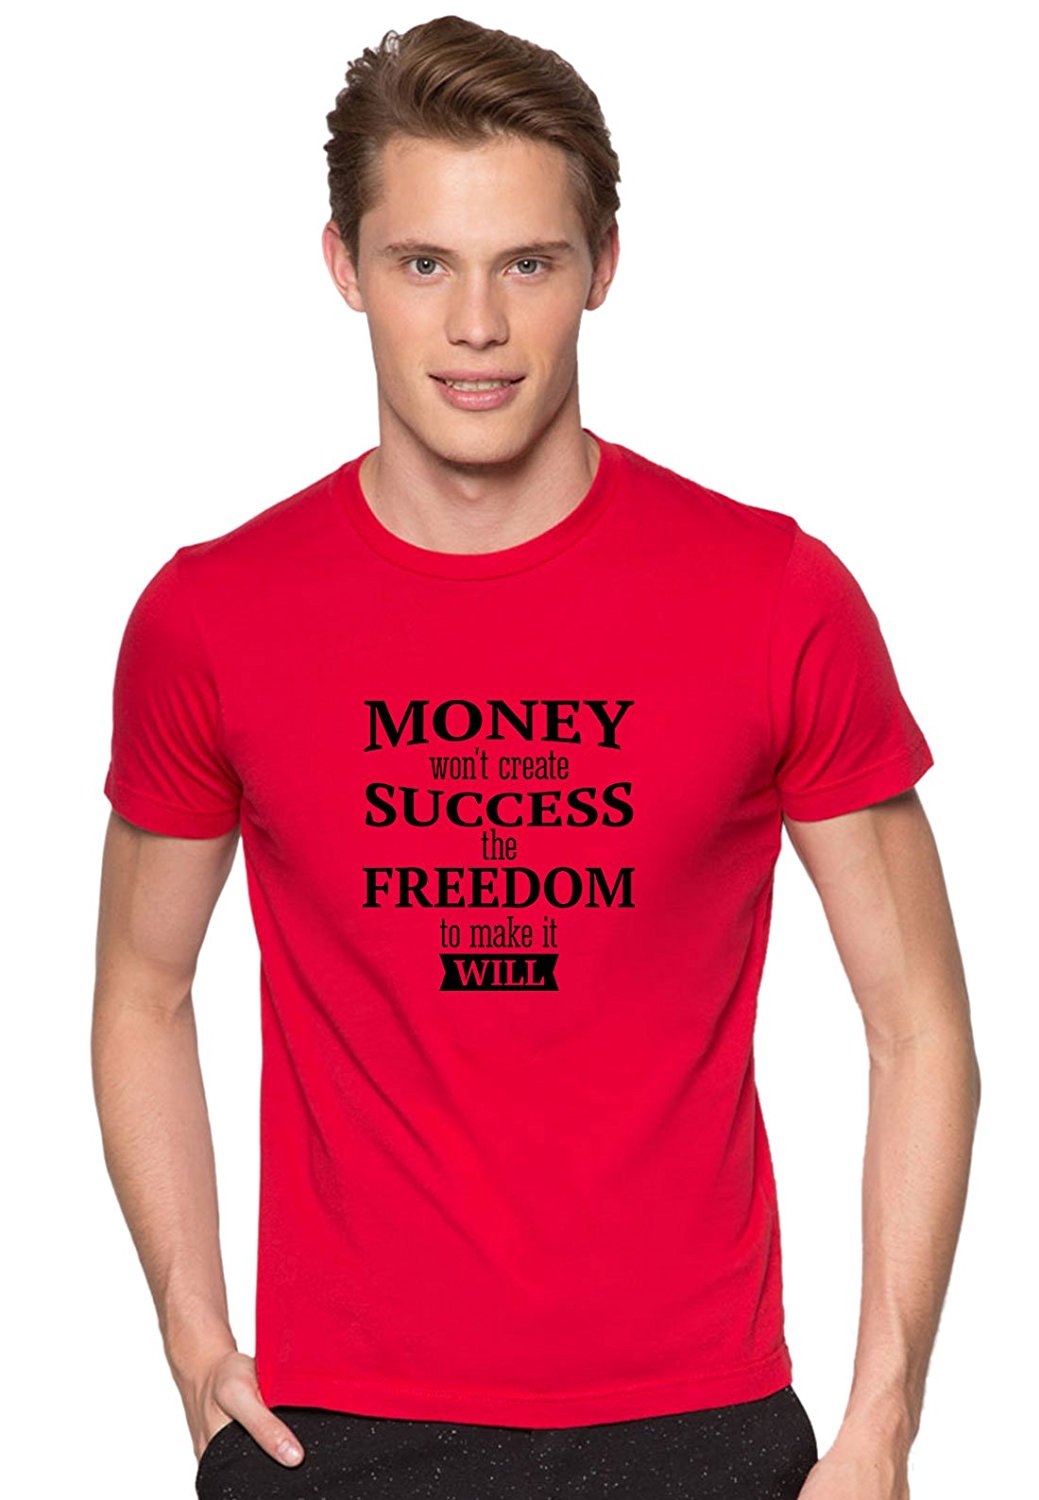 DOUBLE F ROUND NECK HALF SLEEVE MONEY SUCCESS FREEDOM WITH 09 COLORS PRINTED T-SHIRTS FOR MEN  